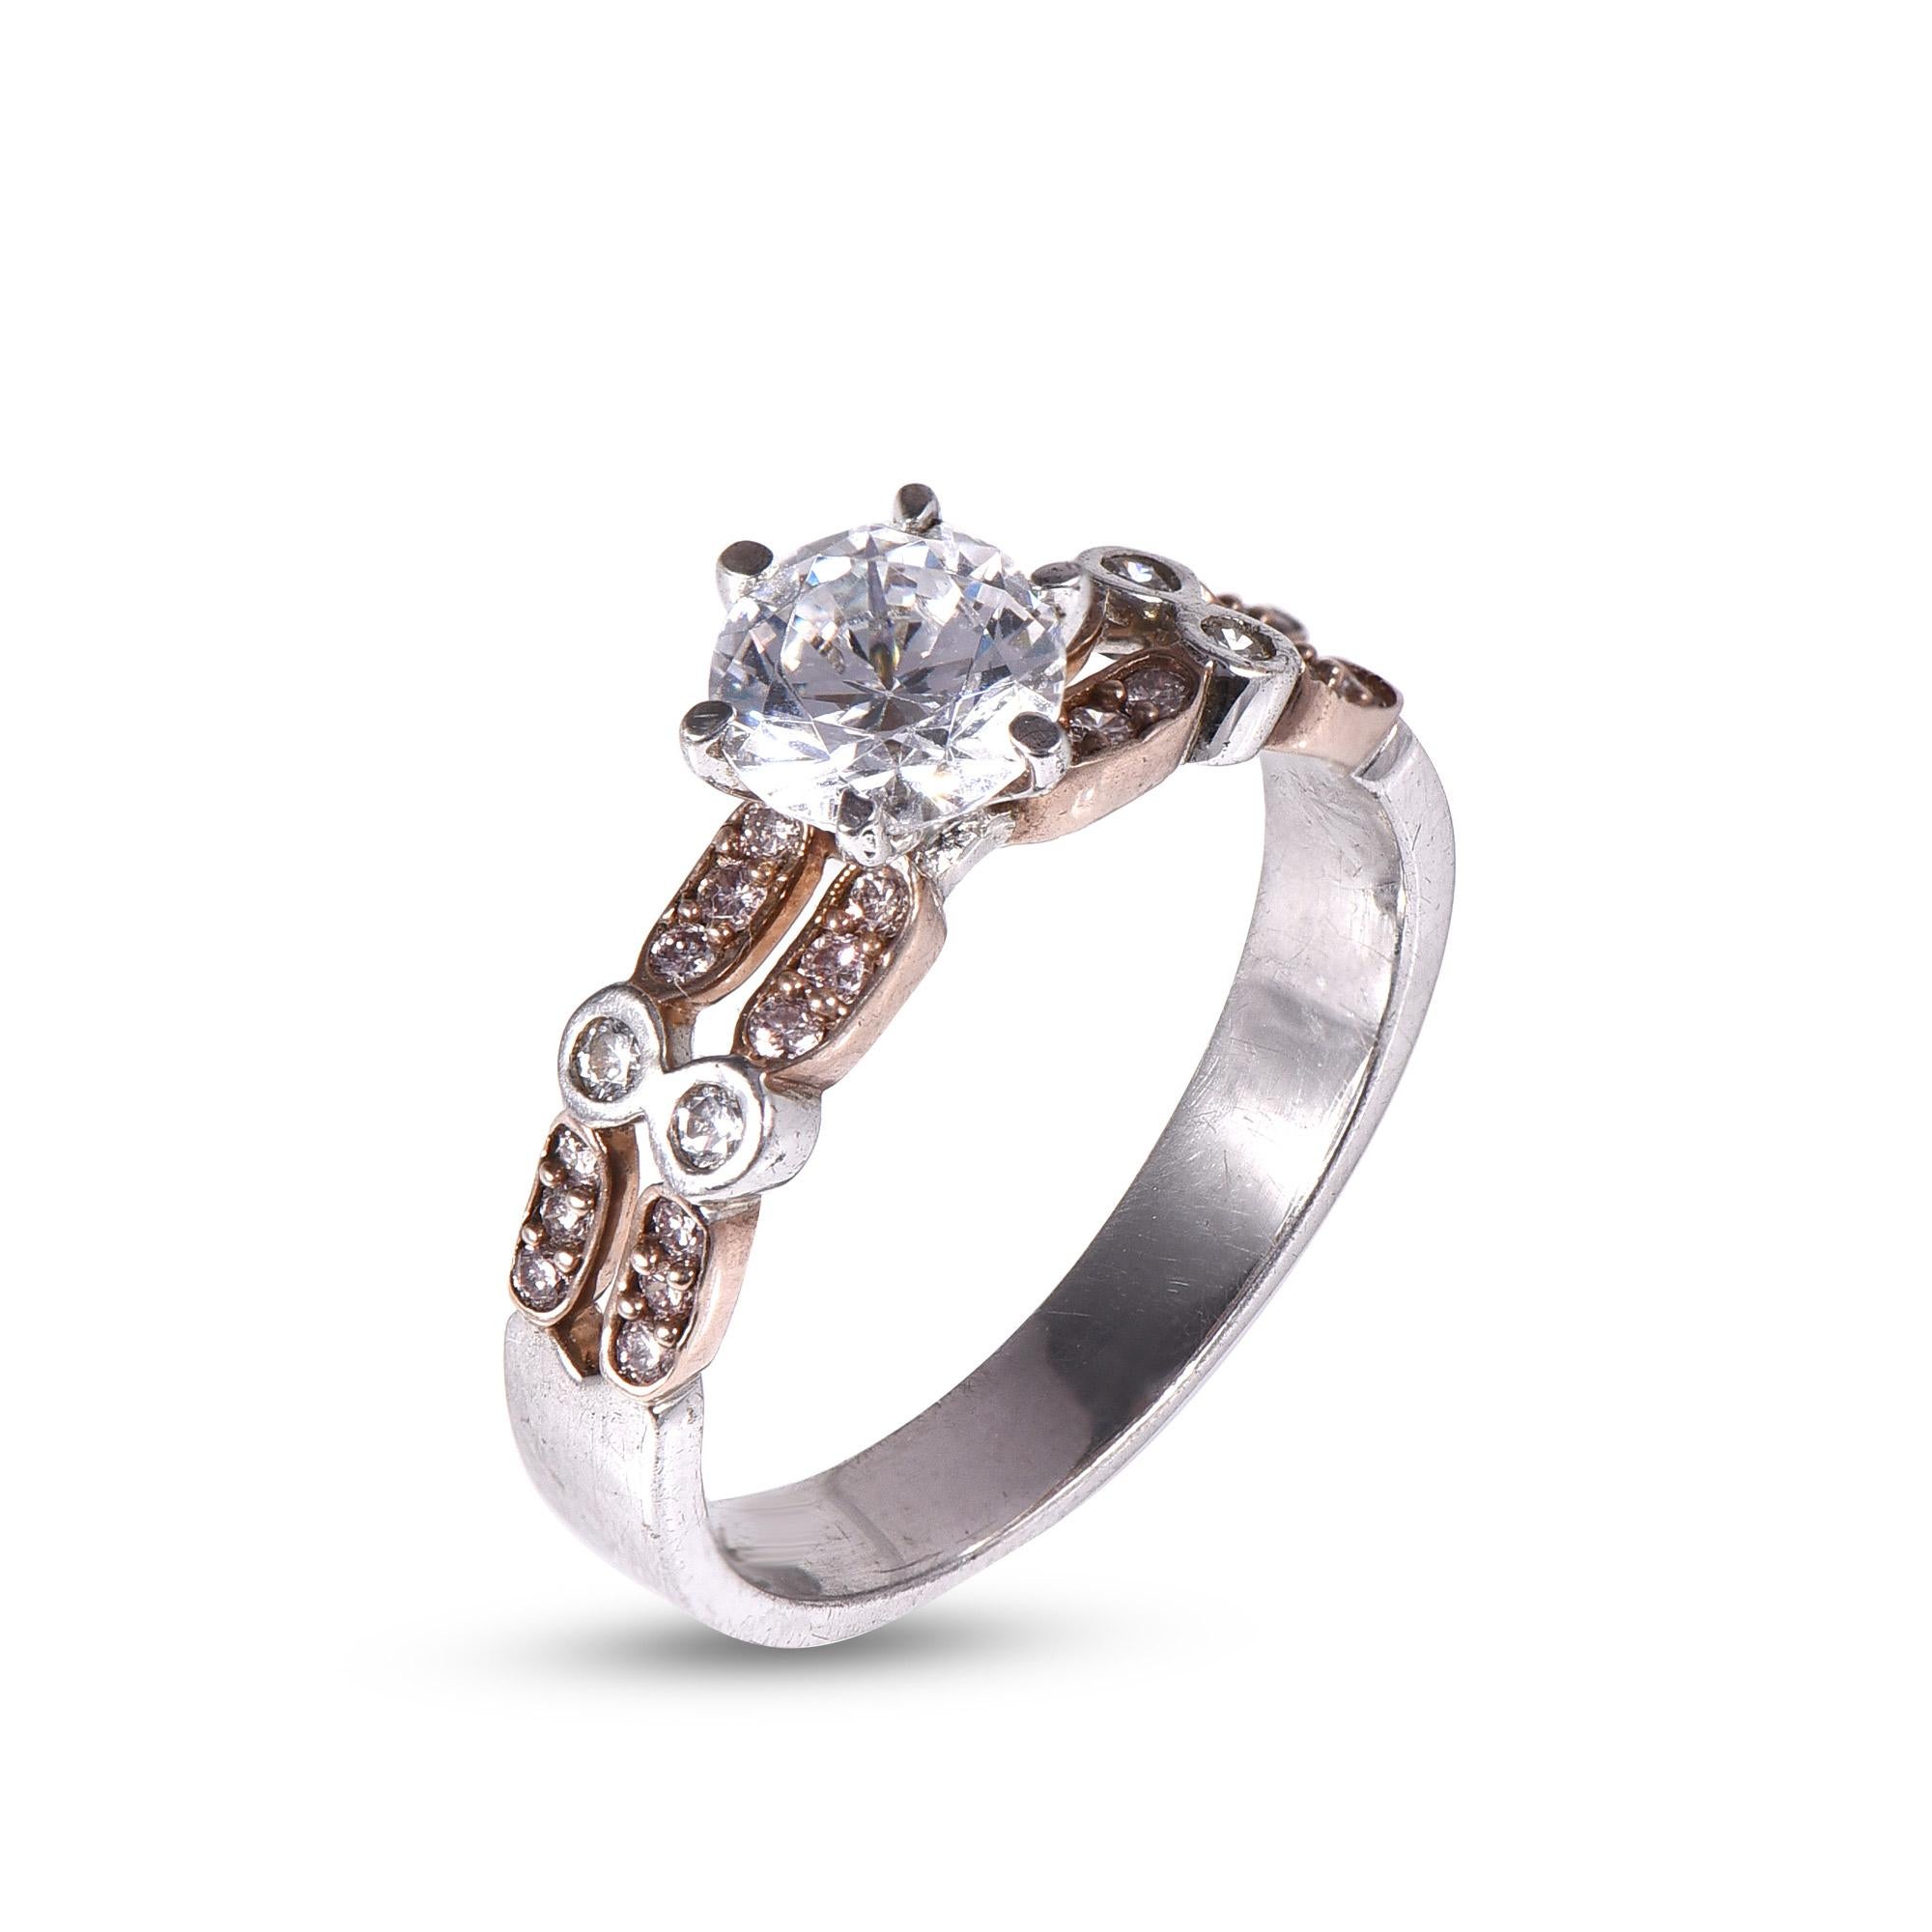 Exquisite 18 KT white gold ring featuring 0.85 ct centre stone and 0.30 ct split shank jewelled with white and pink diamonds. This ring is superbly detailed to perfection and set in secured prong, pave and bezel setting. The diamonds are natural,